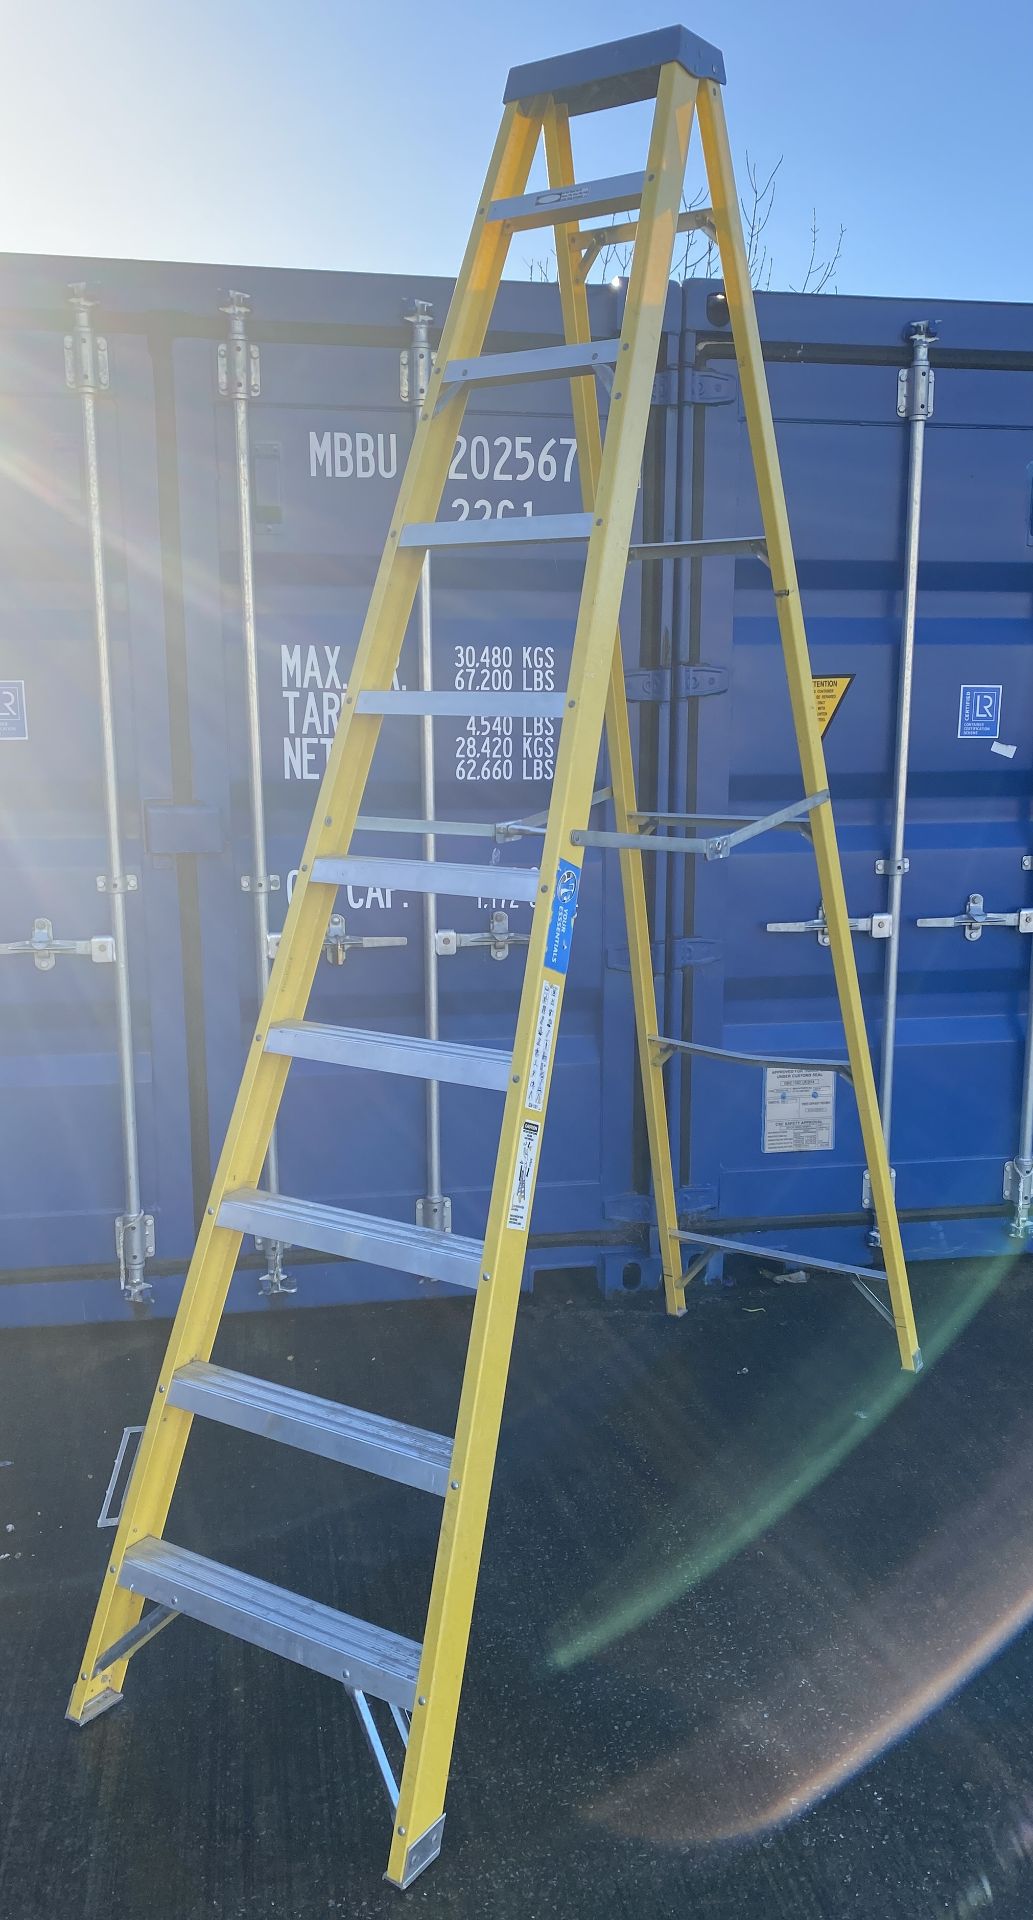 Pair of YourEssentials 9-tread step-ladders ref: YFSL010 (saleroom location: container 9) - Image 2 of 3